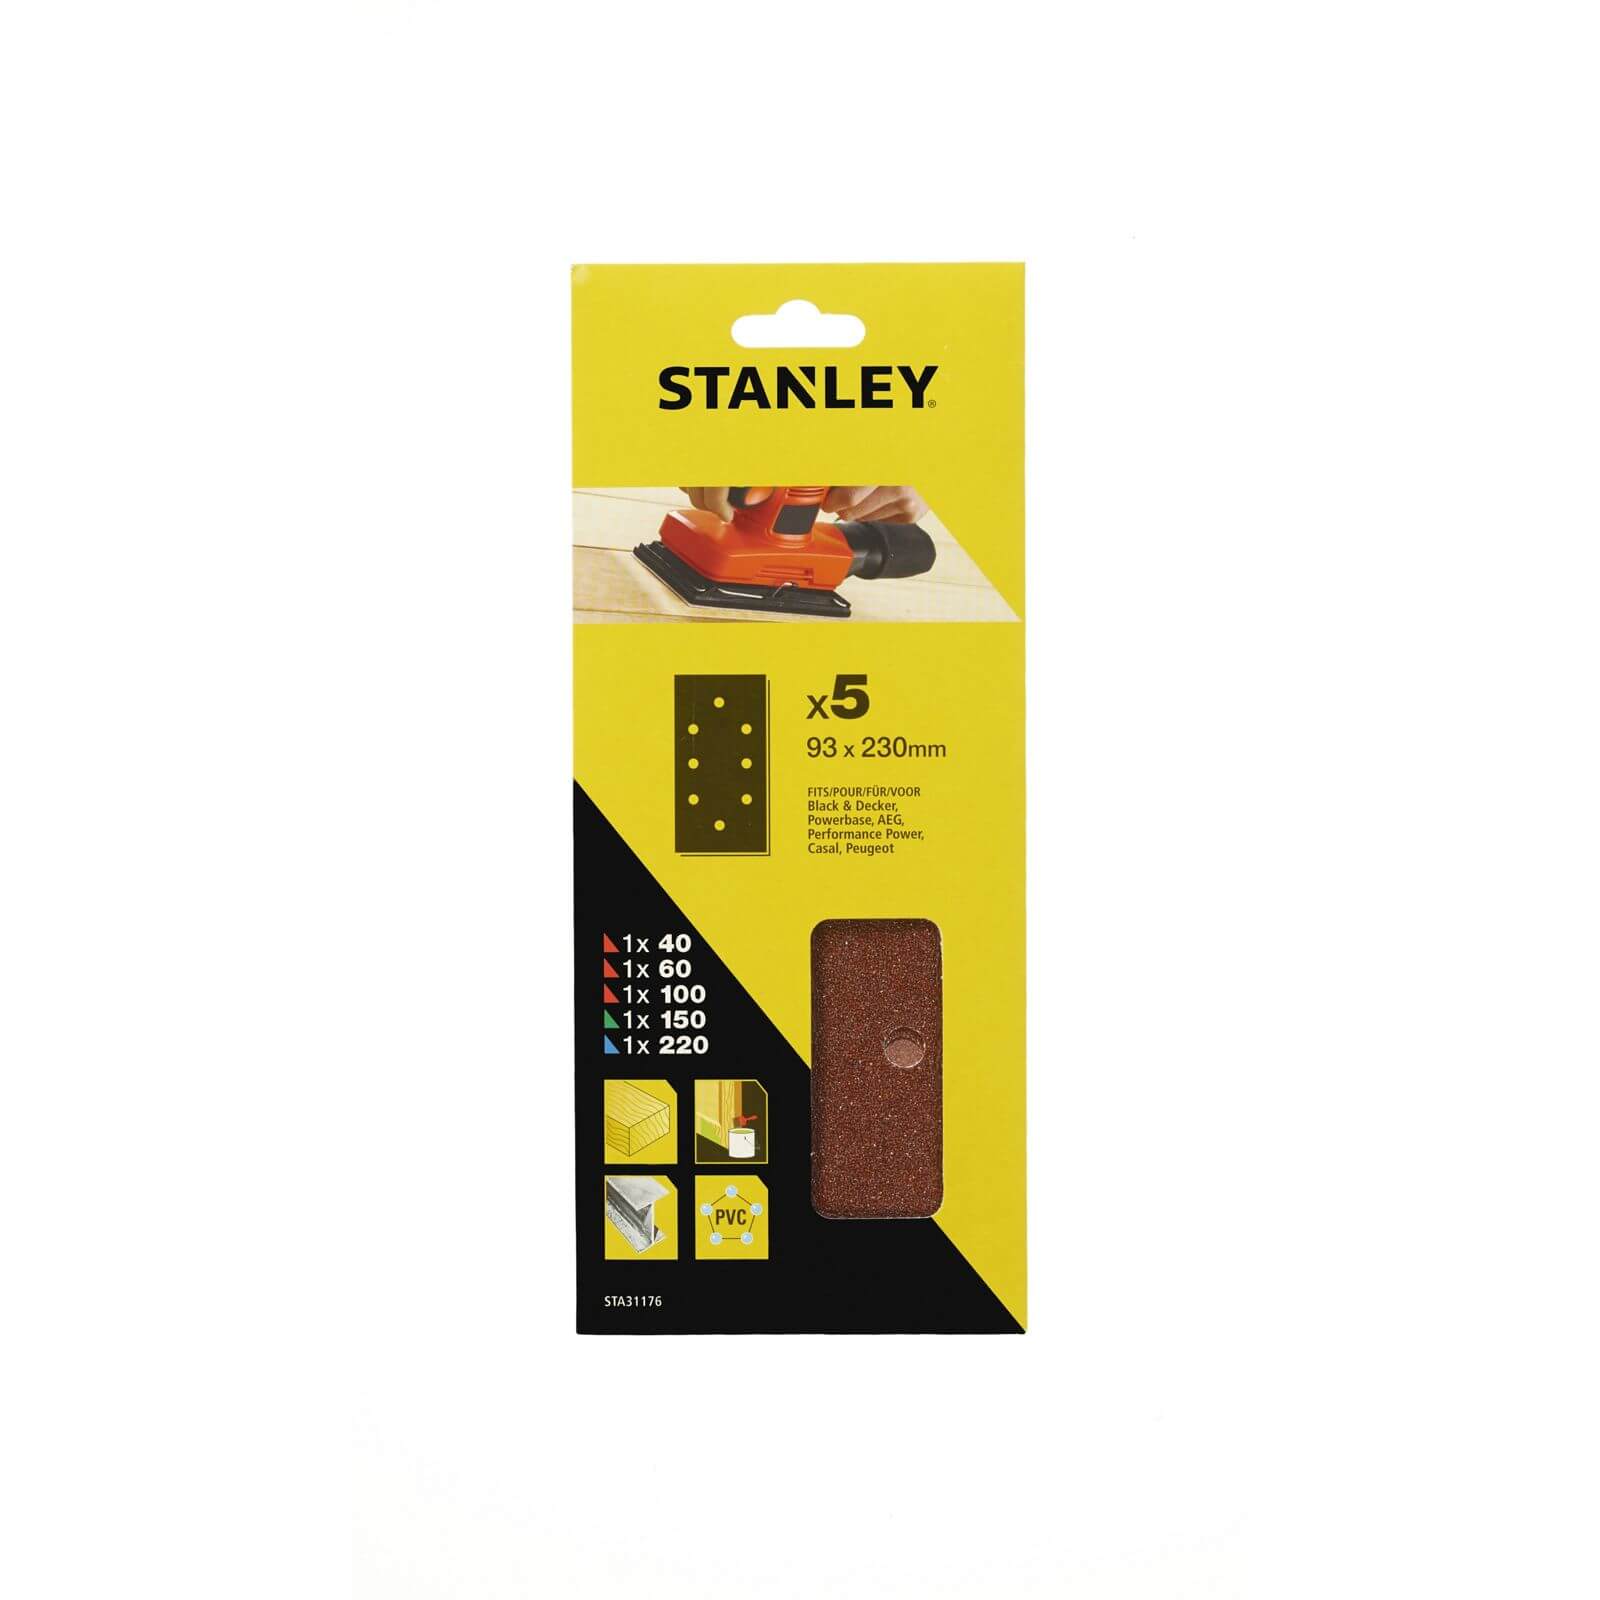 Photo of Stanley 1/3 Sheet Sanding Punched Wire Clip Mixed Sanding Sheets - Sta31176-xj